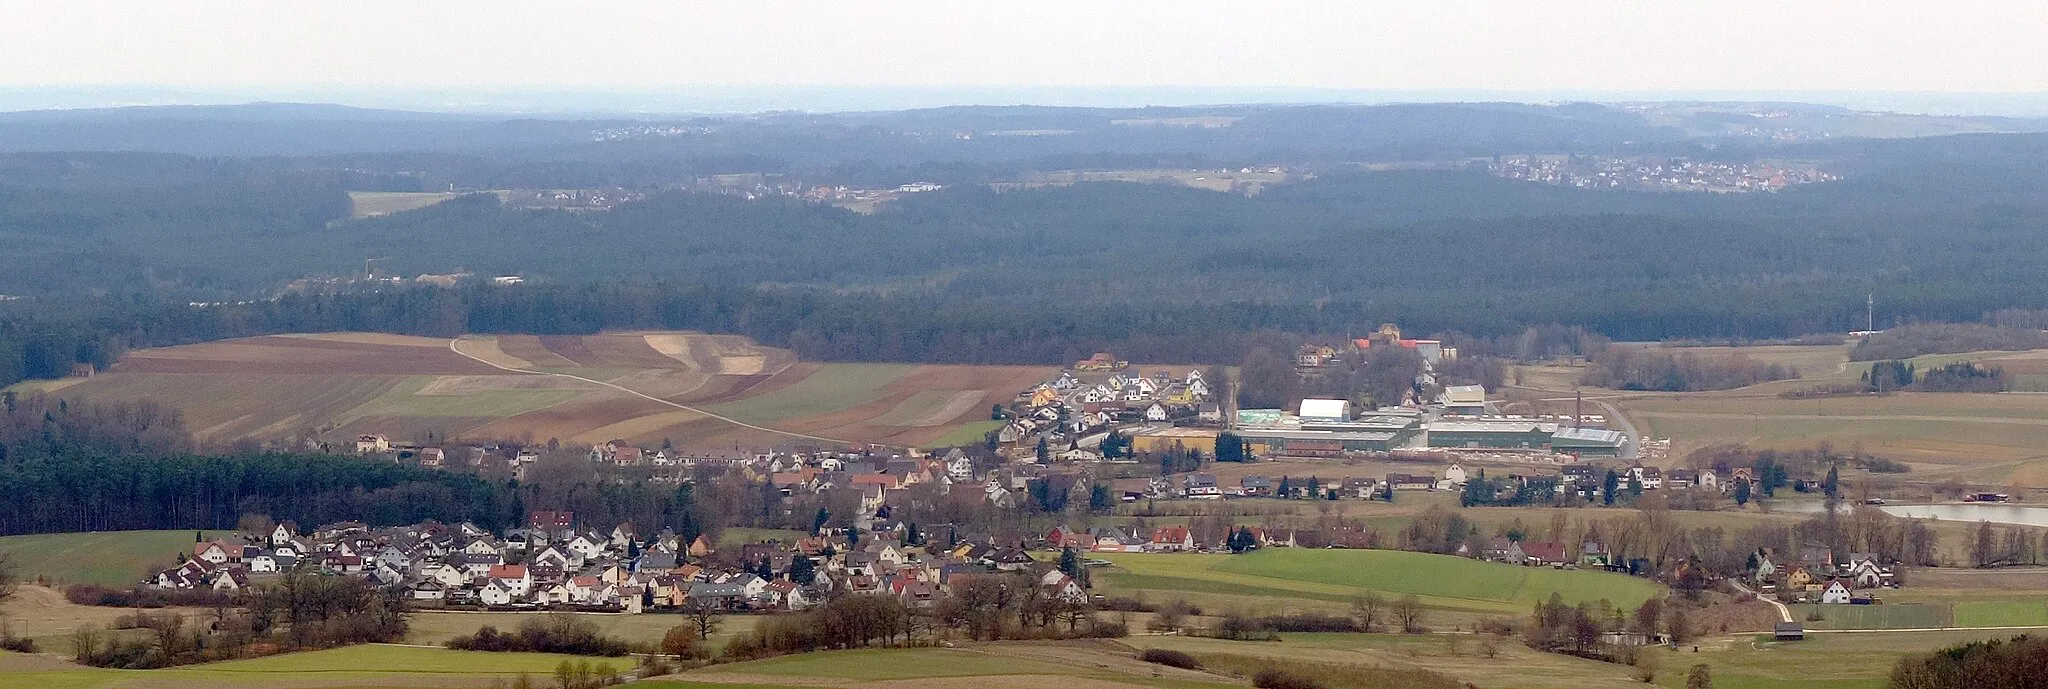 Photo showing: A panorama of Rollhofen, a village of the town of Neunkirchen am Sand in northern Bavaria.